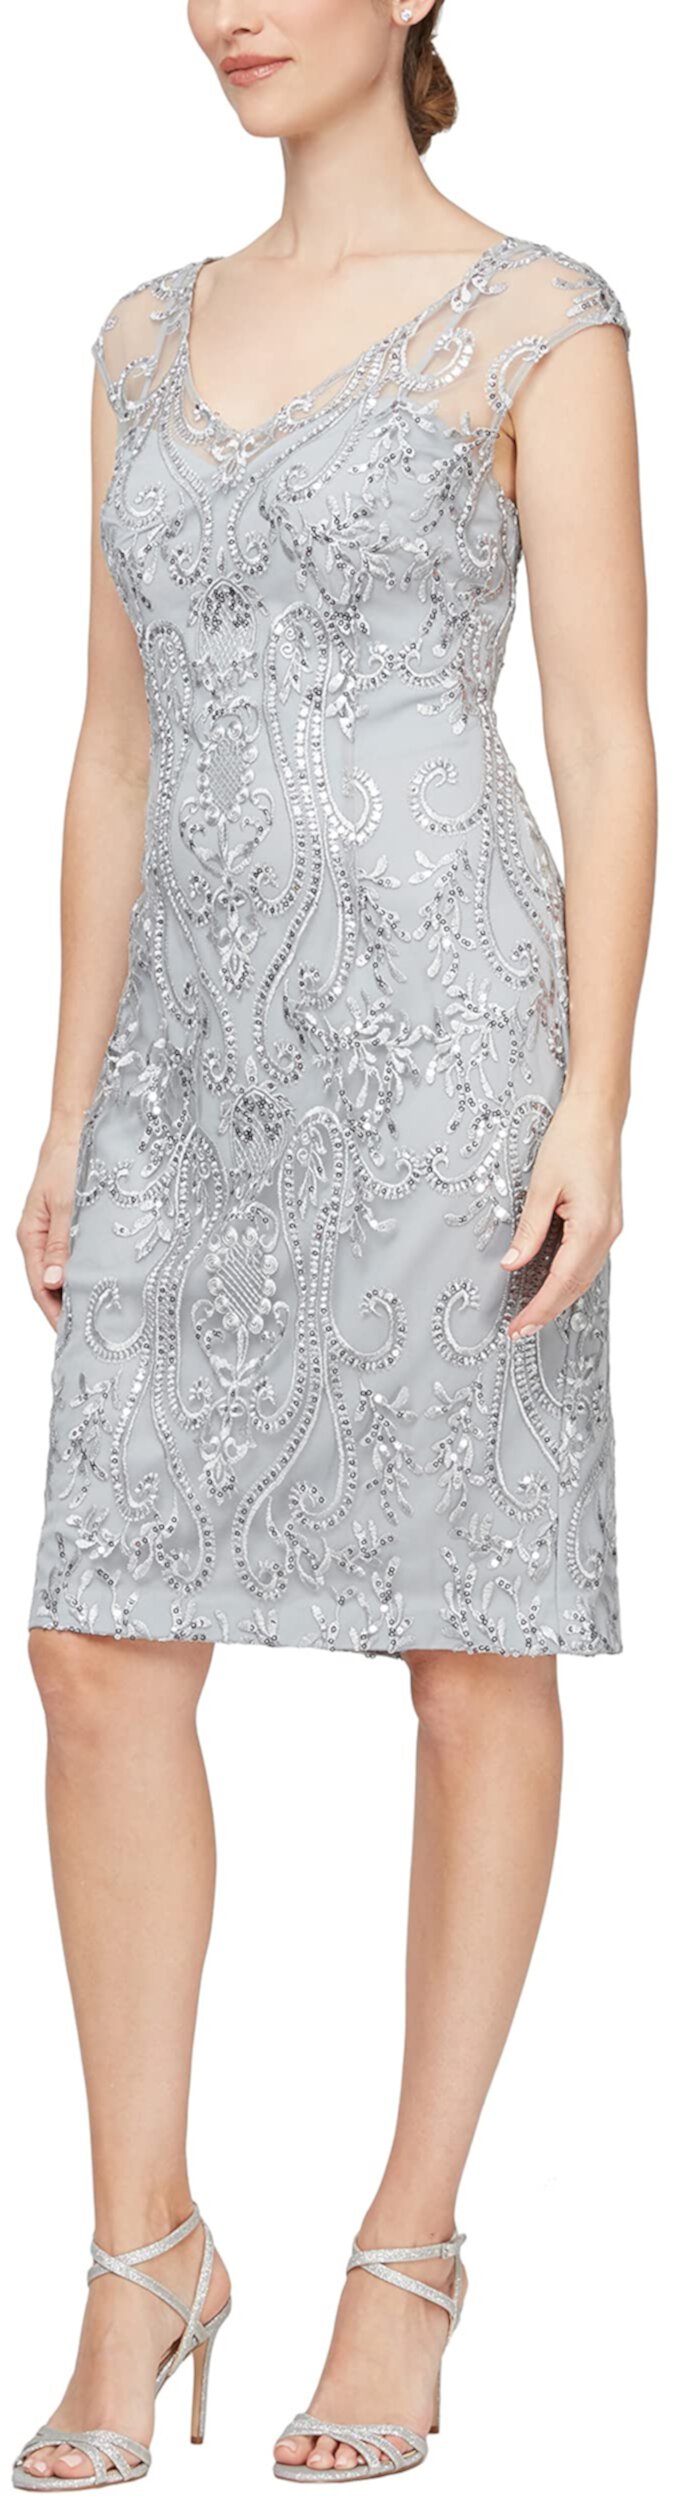 Short Embroidered Dress with Illusion Neckline Alex Evenings